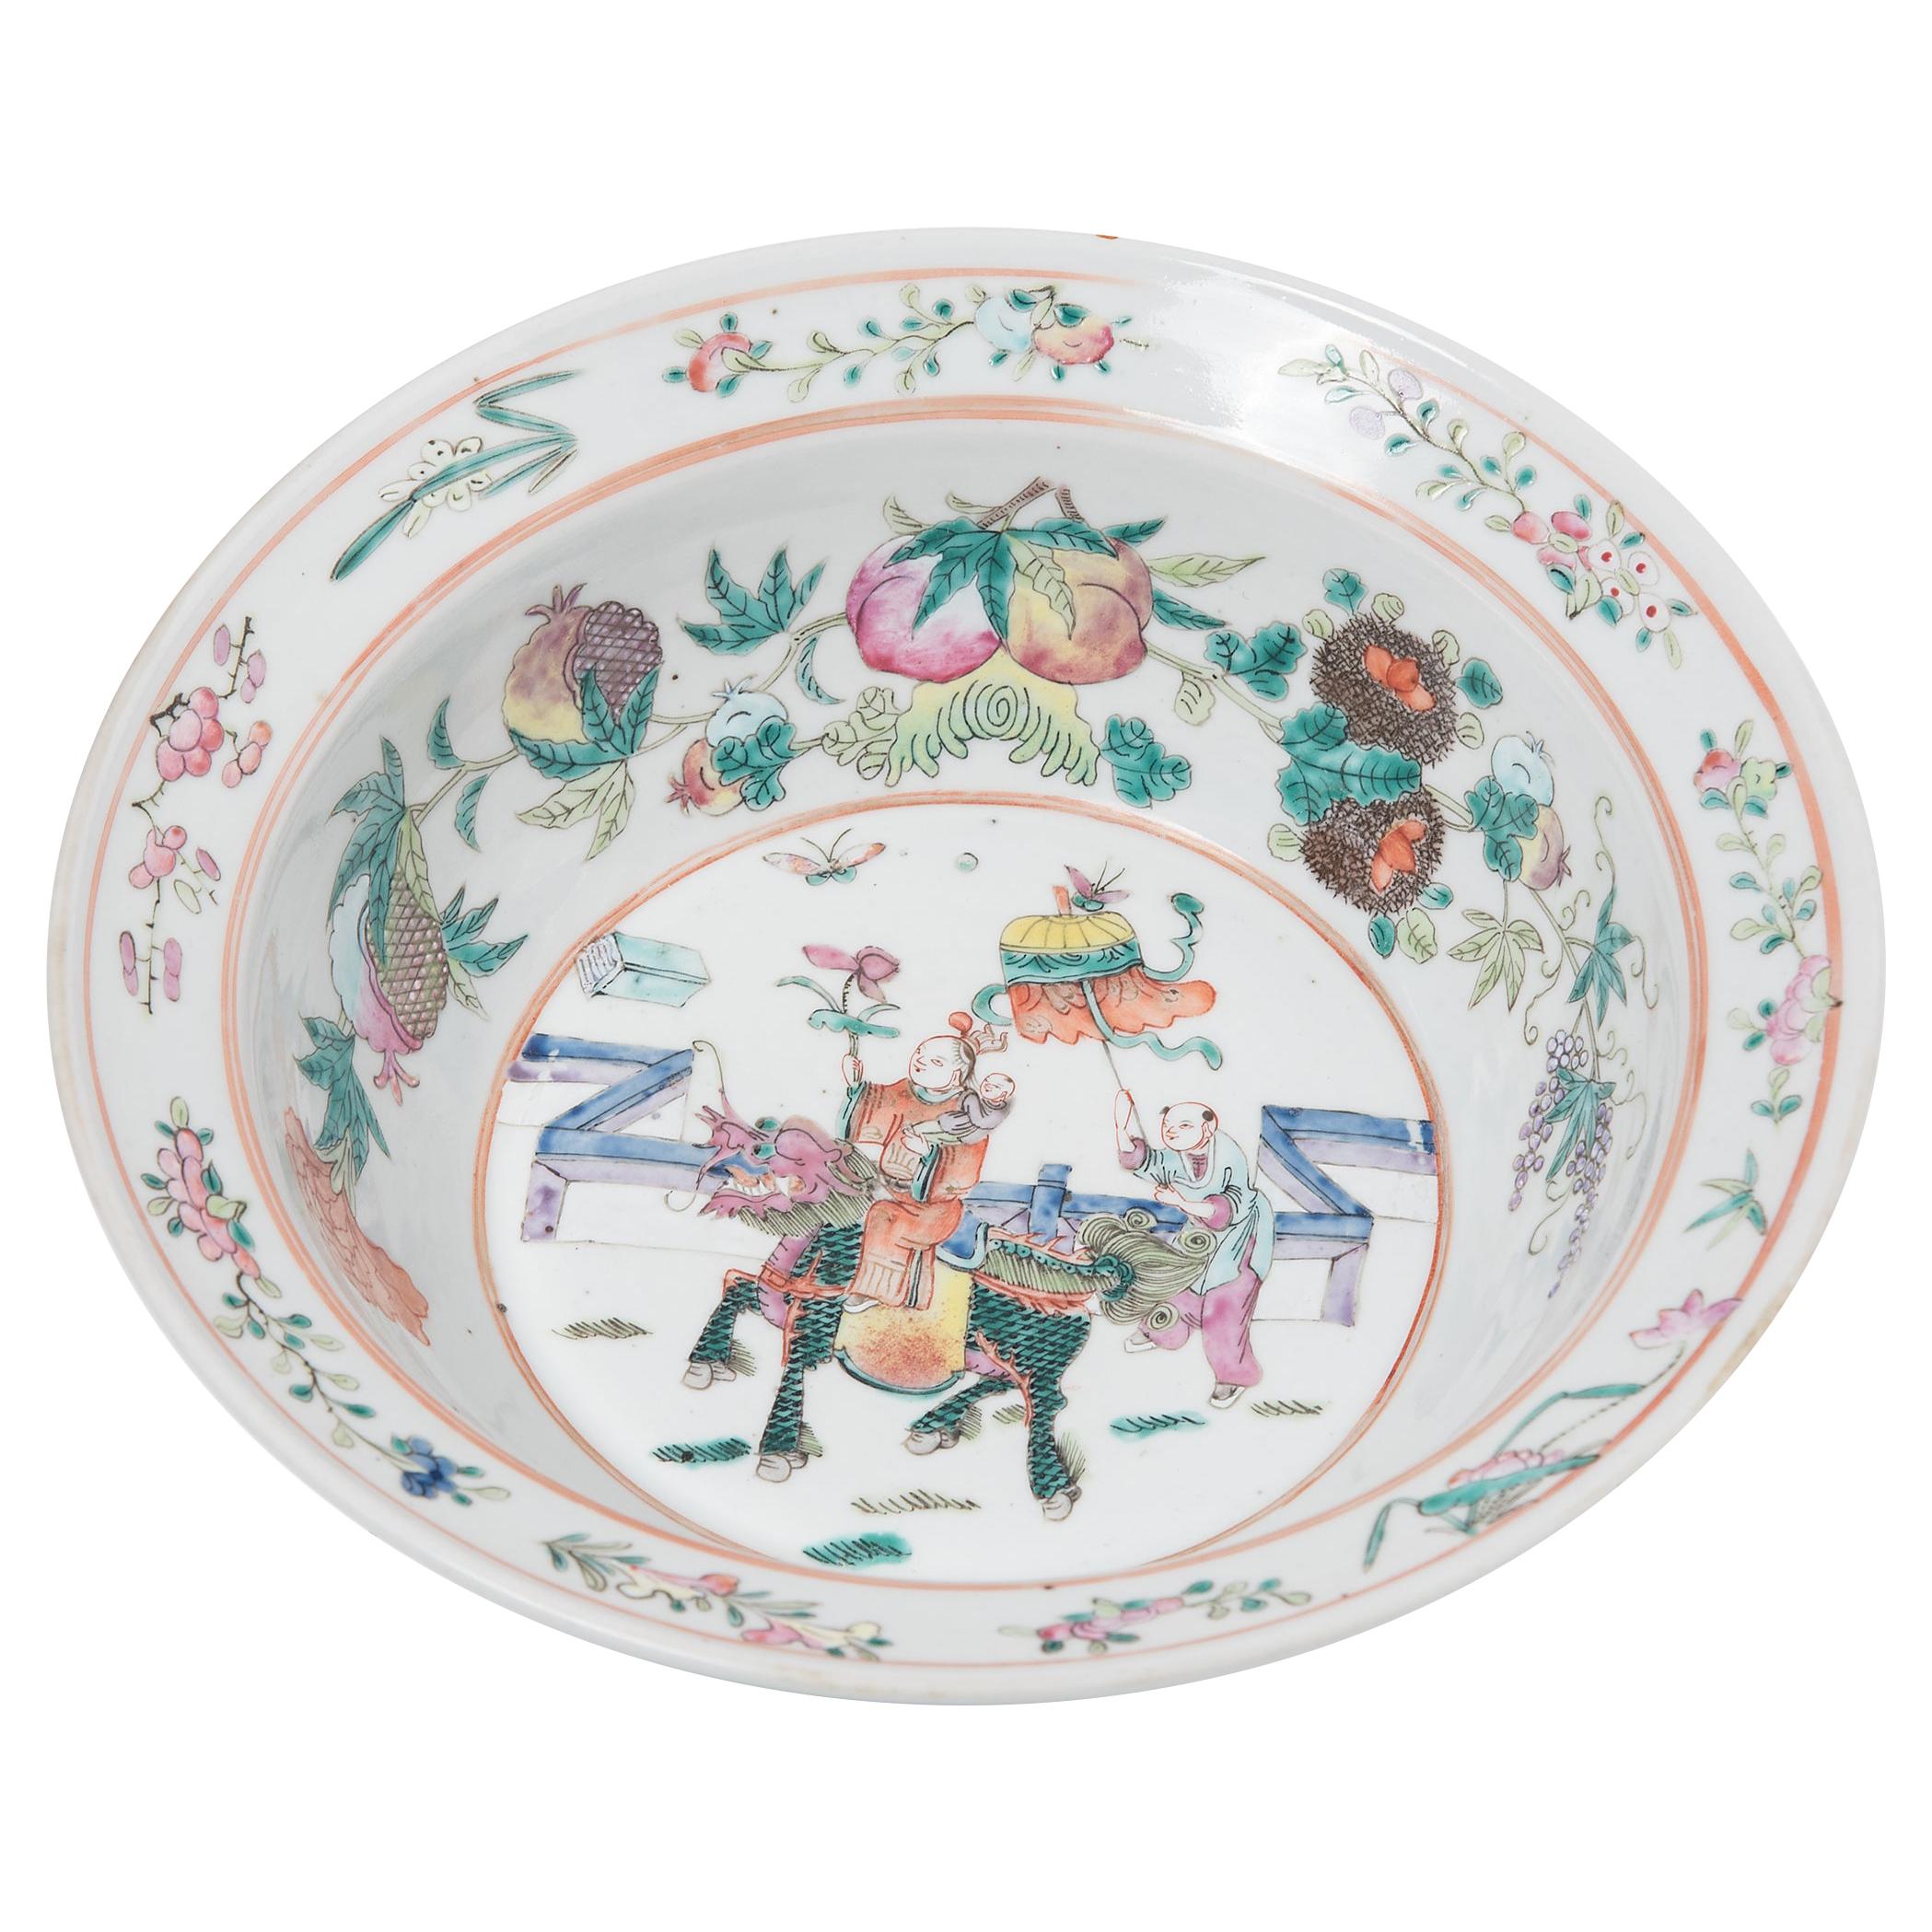 Chinese Famille Rose Bowl with Offering Fruits, c. 1900